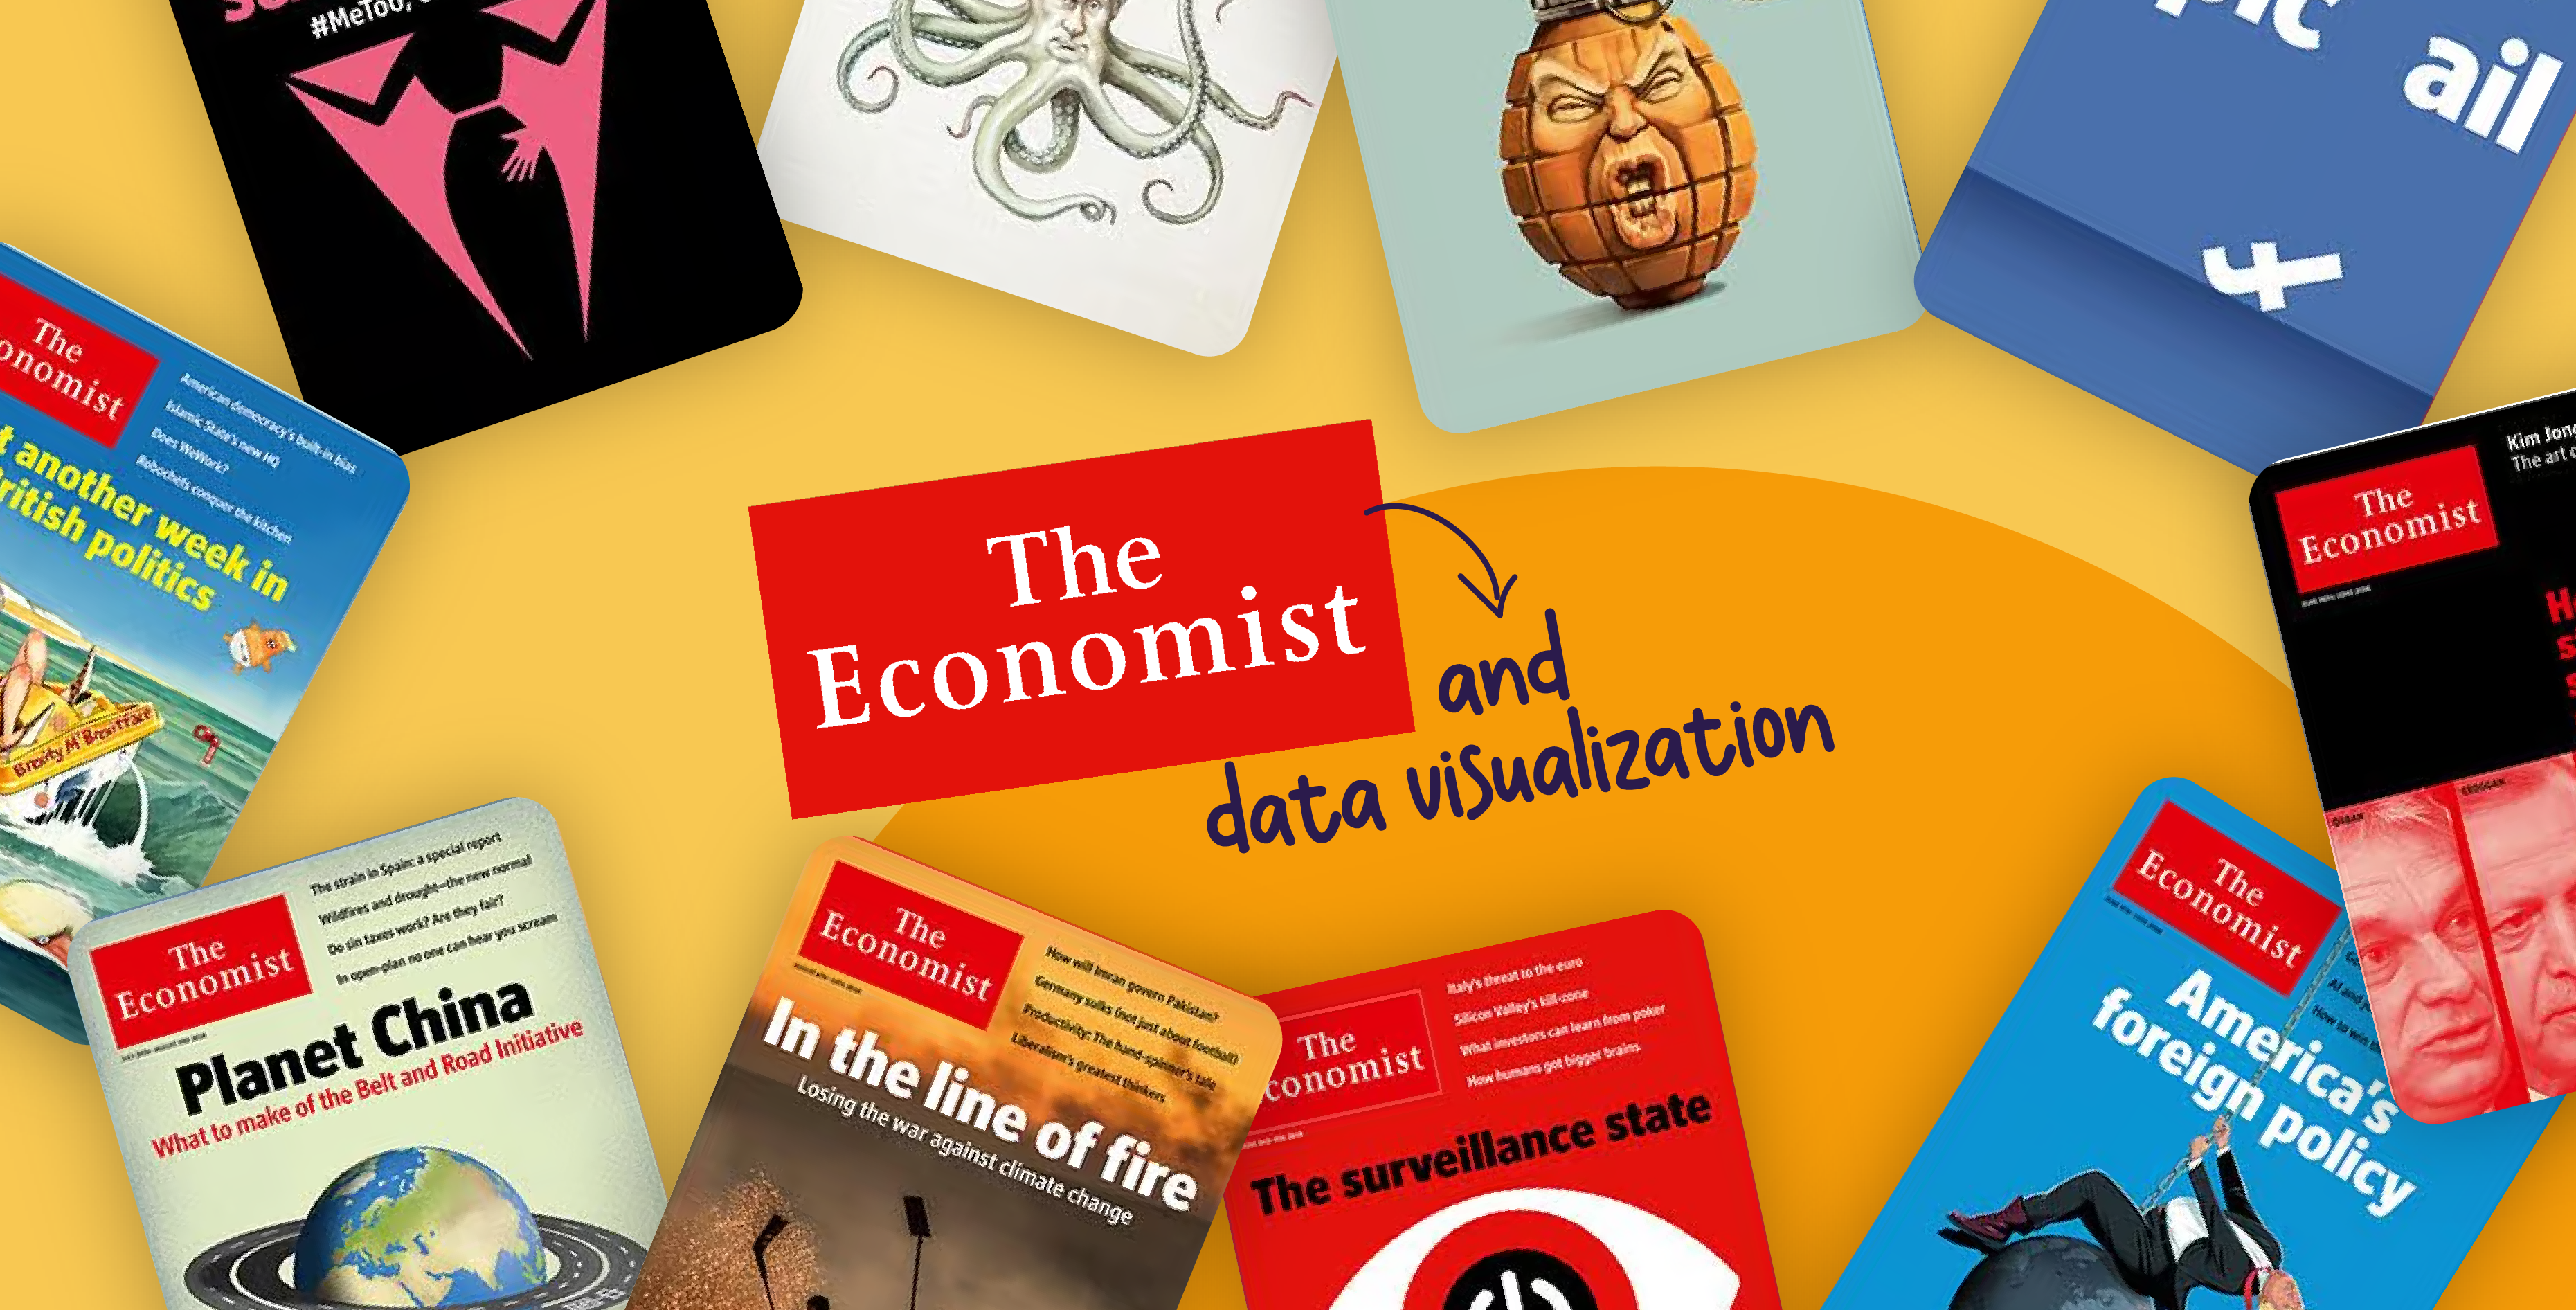 What we can learn from the Economist about data visualization